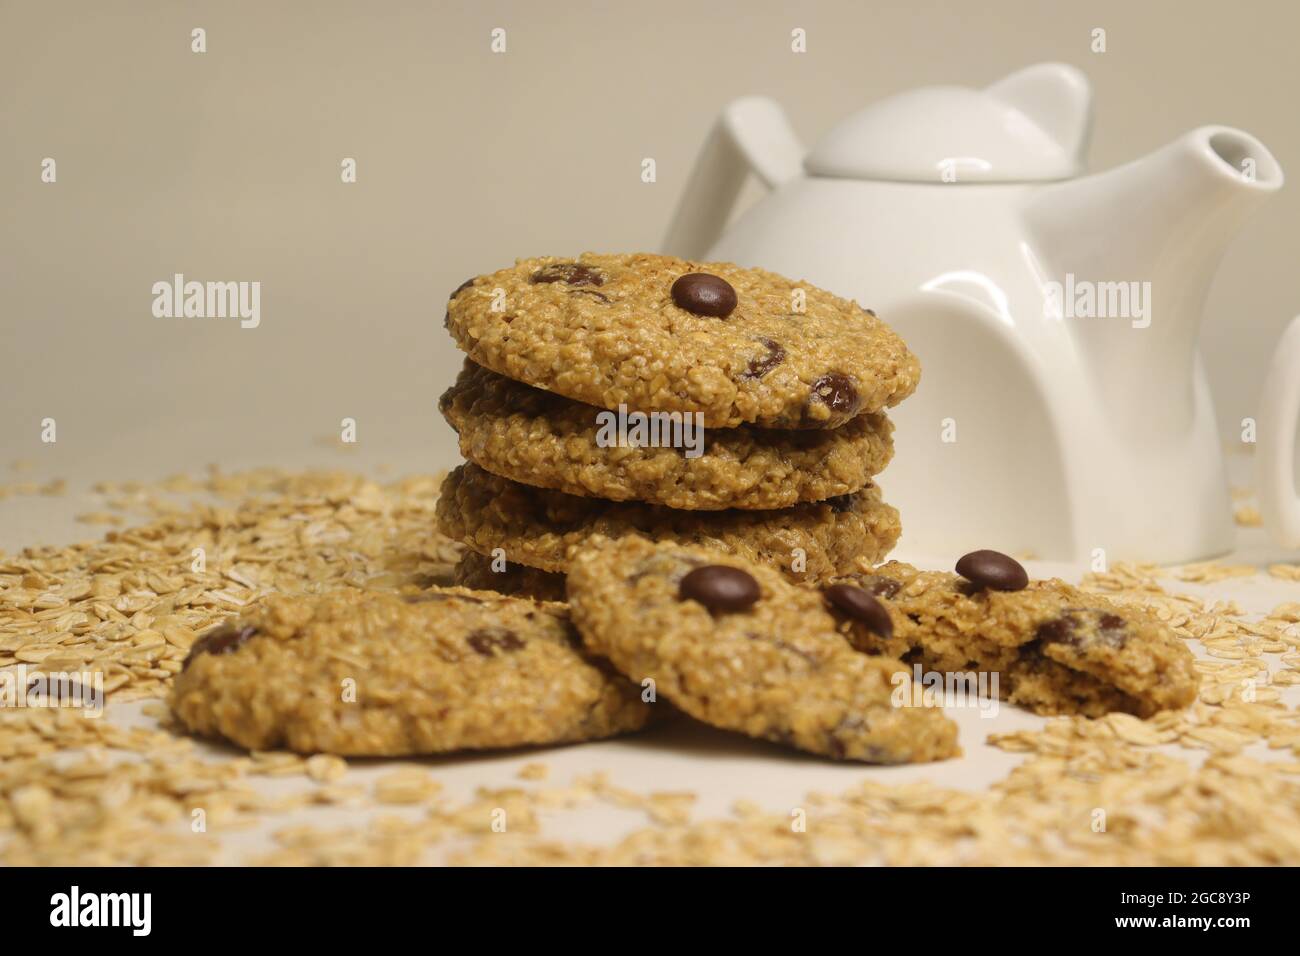 Peanut butter oatmeal Choco chips cookies. A home baked healthy snack. Shot on white background. Stock Photo